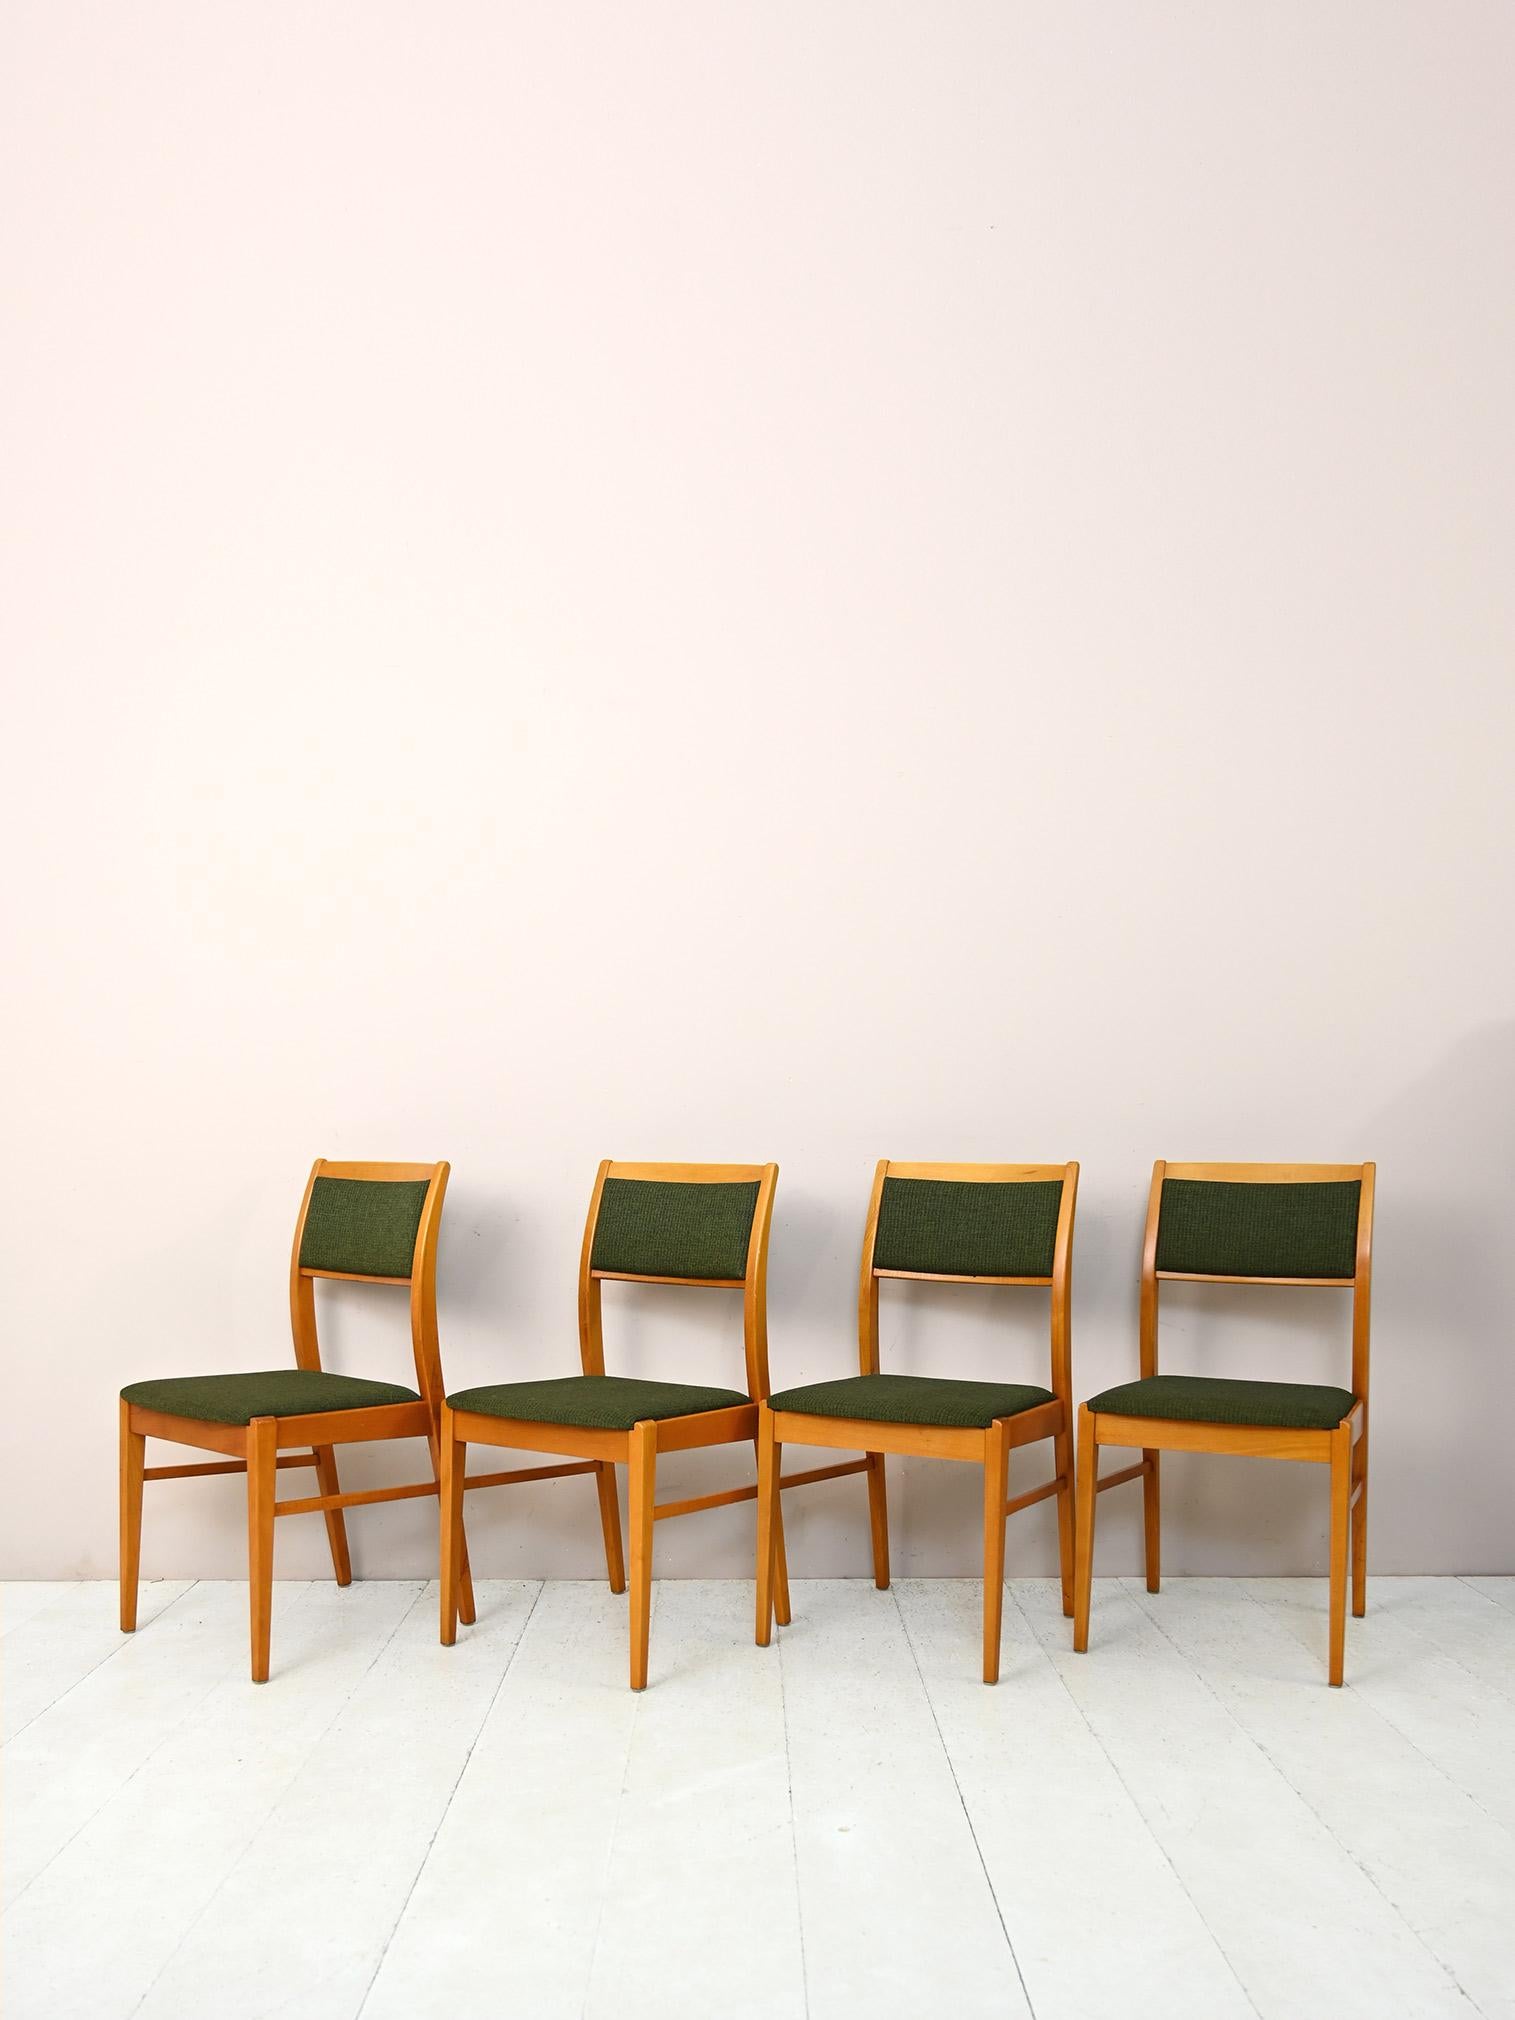 Set of 4 original vintage Scandinavian chairs.

This chair model harks back to the typical mid-century style. The lightweight frame is made of birch wood while the back and seat are upholstered and lined with original vintage green